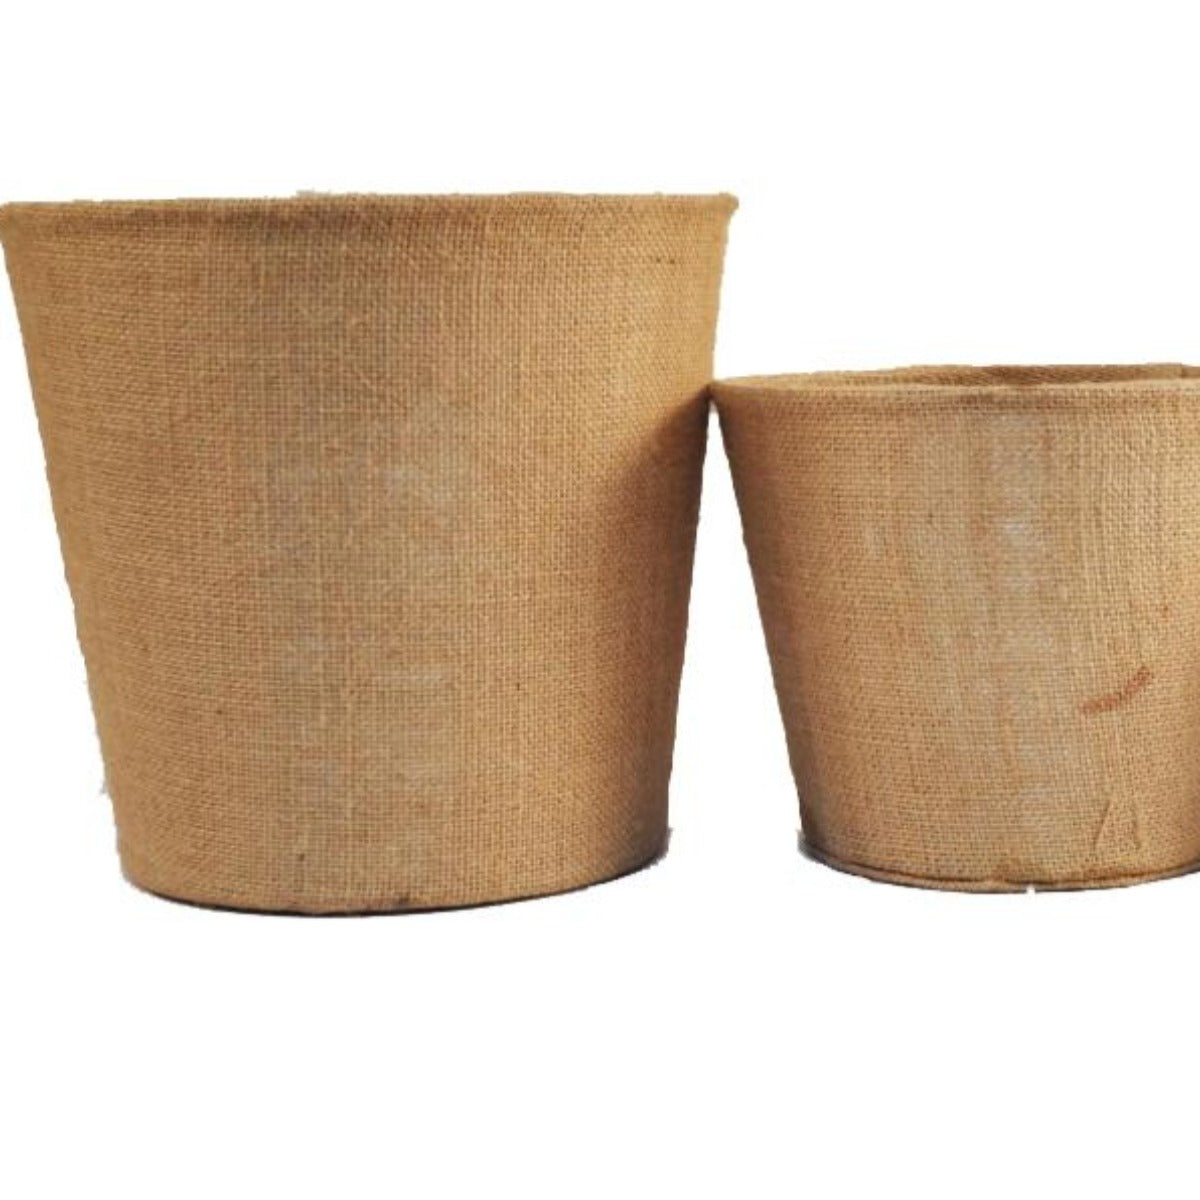 Burlap Covered Tin Baskets-Iron Accents